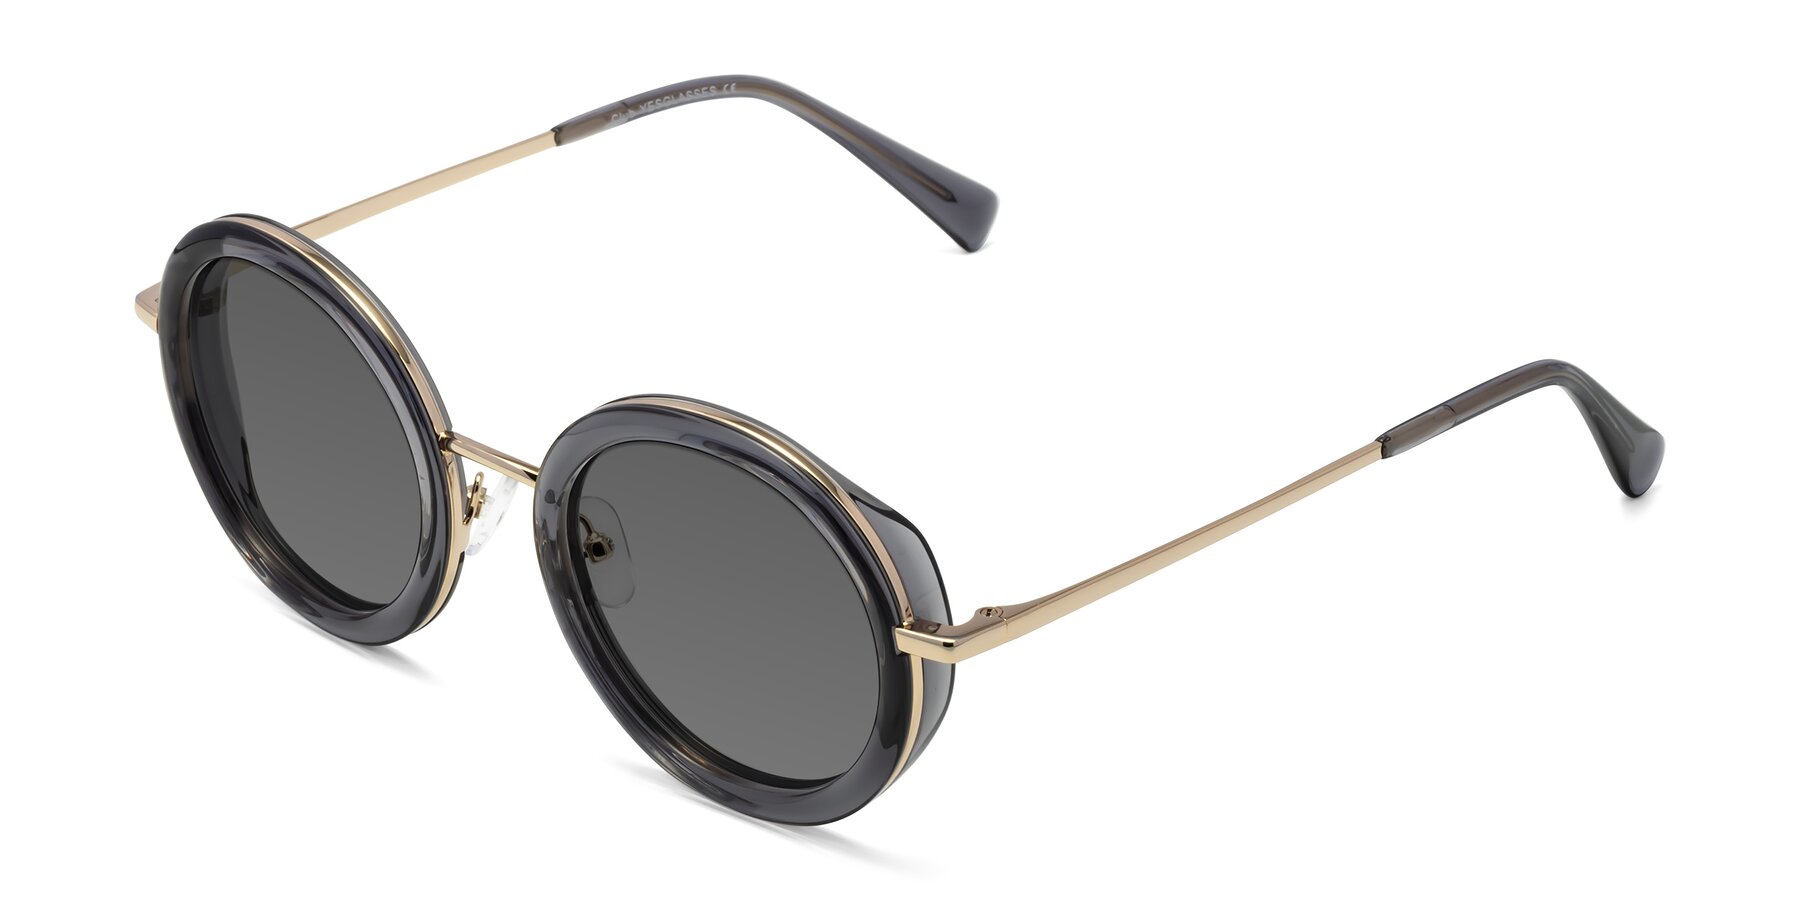 Angle of Club in Gray-Gold with Medium Gray Tinted Lenses